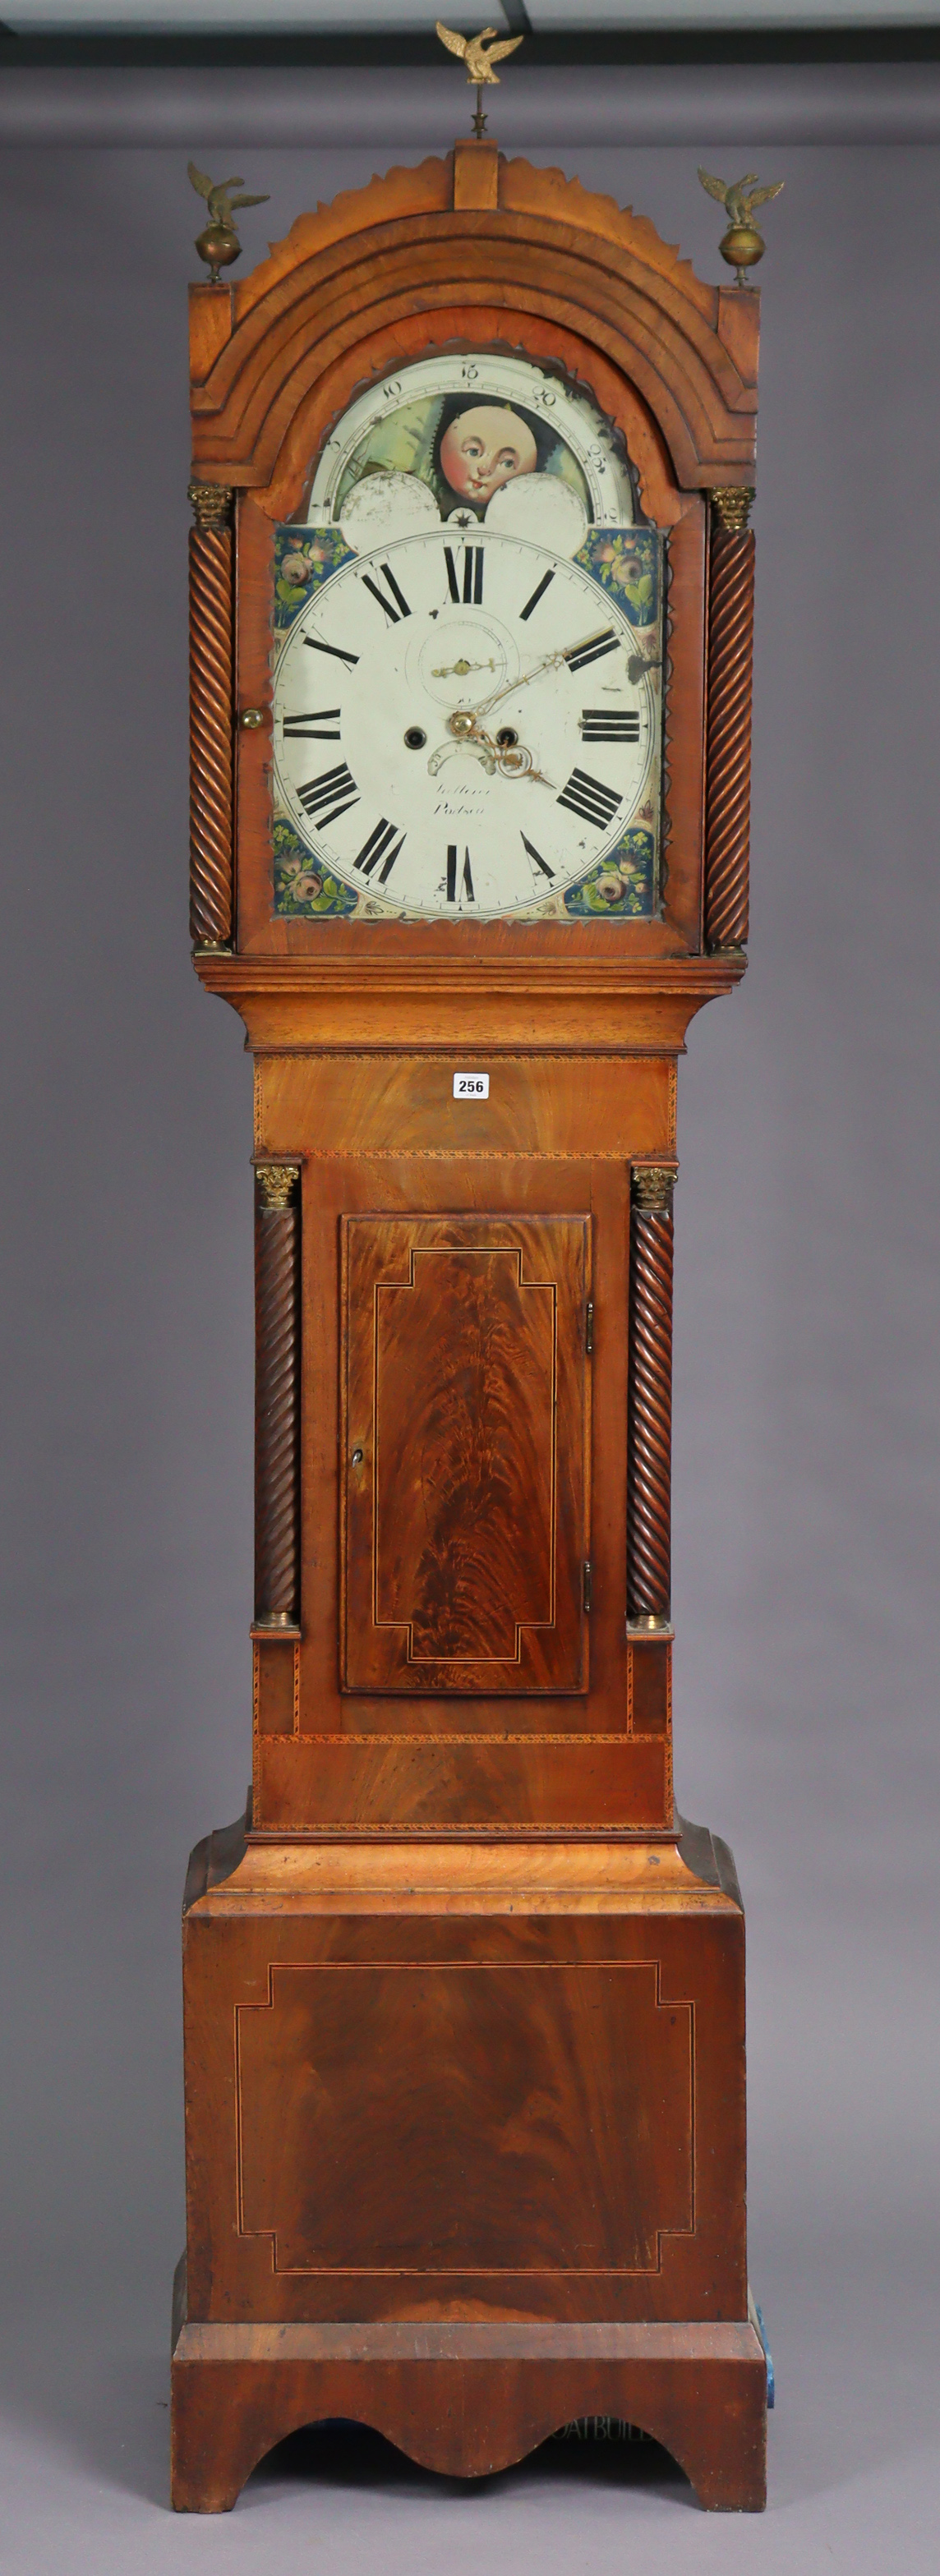 An early 19th century longcase clock, the 14” painted dial with moon-phase, inscribed “Portsea” (